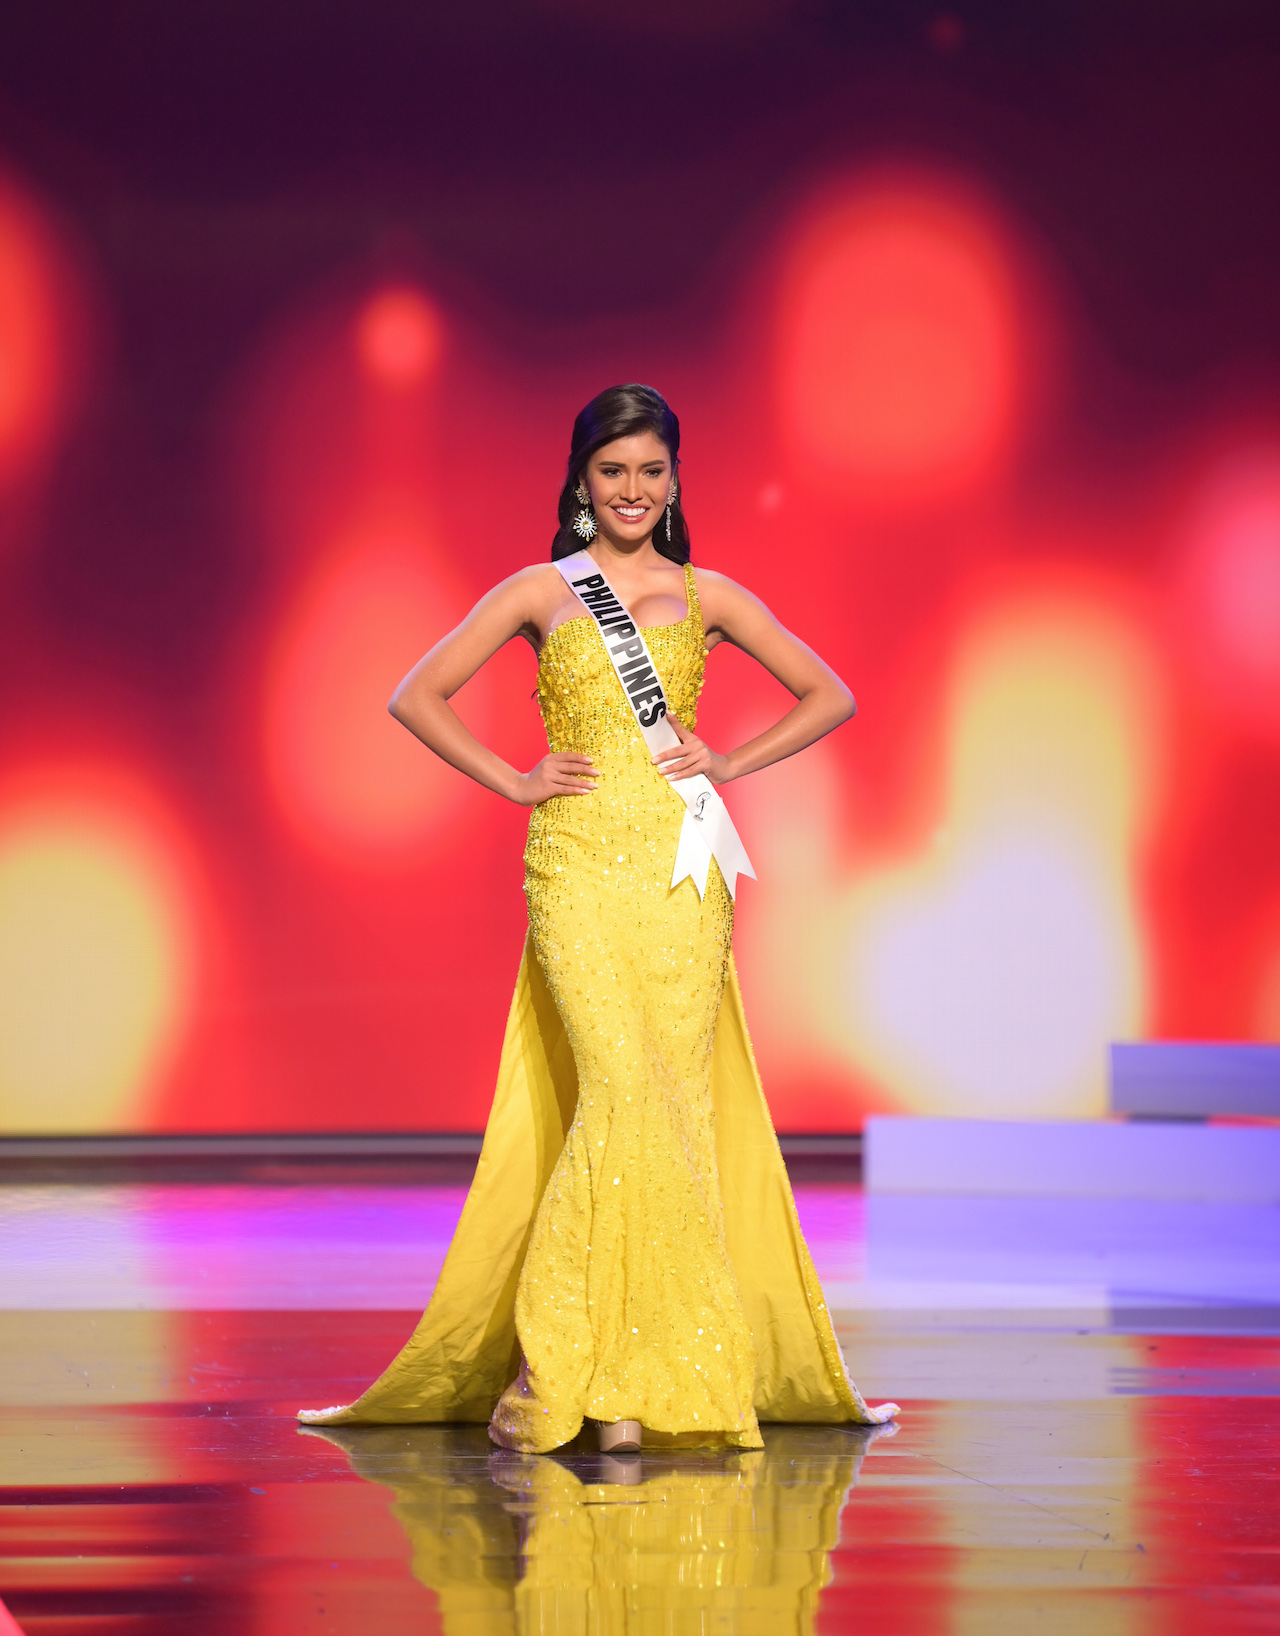 Look Rabiya Mateo Dazzles In Miss Universe 2020 Evening Gown Show